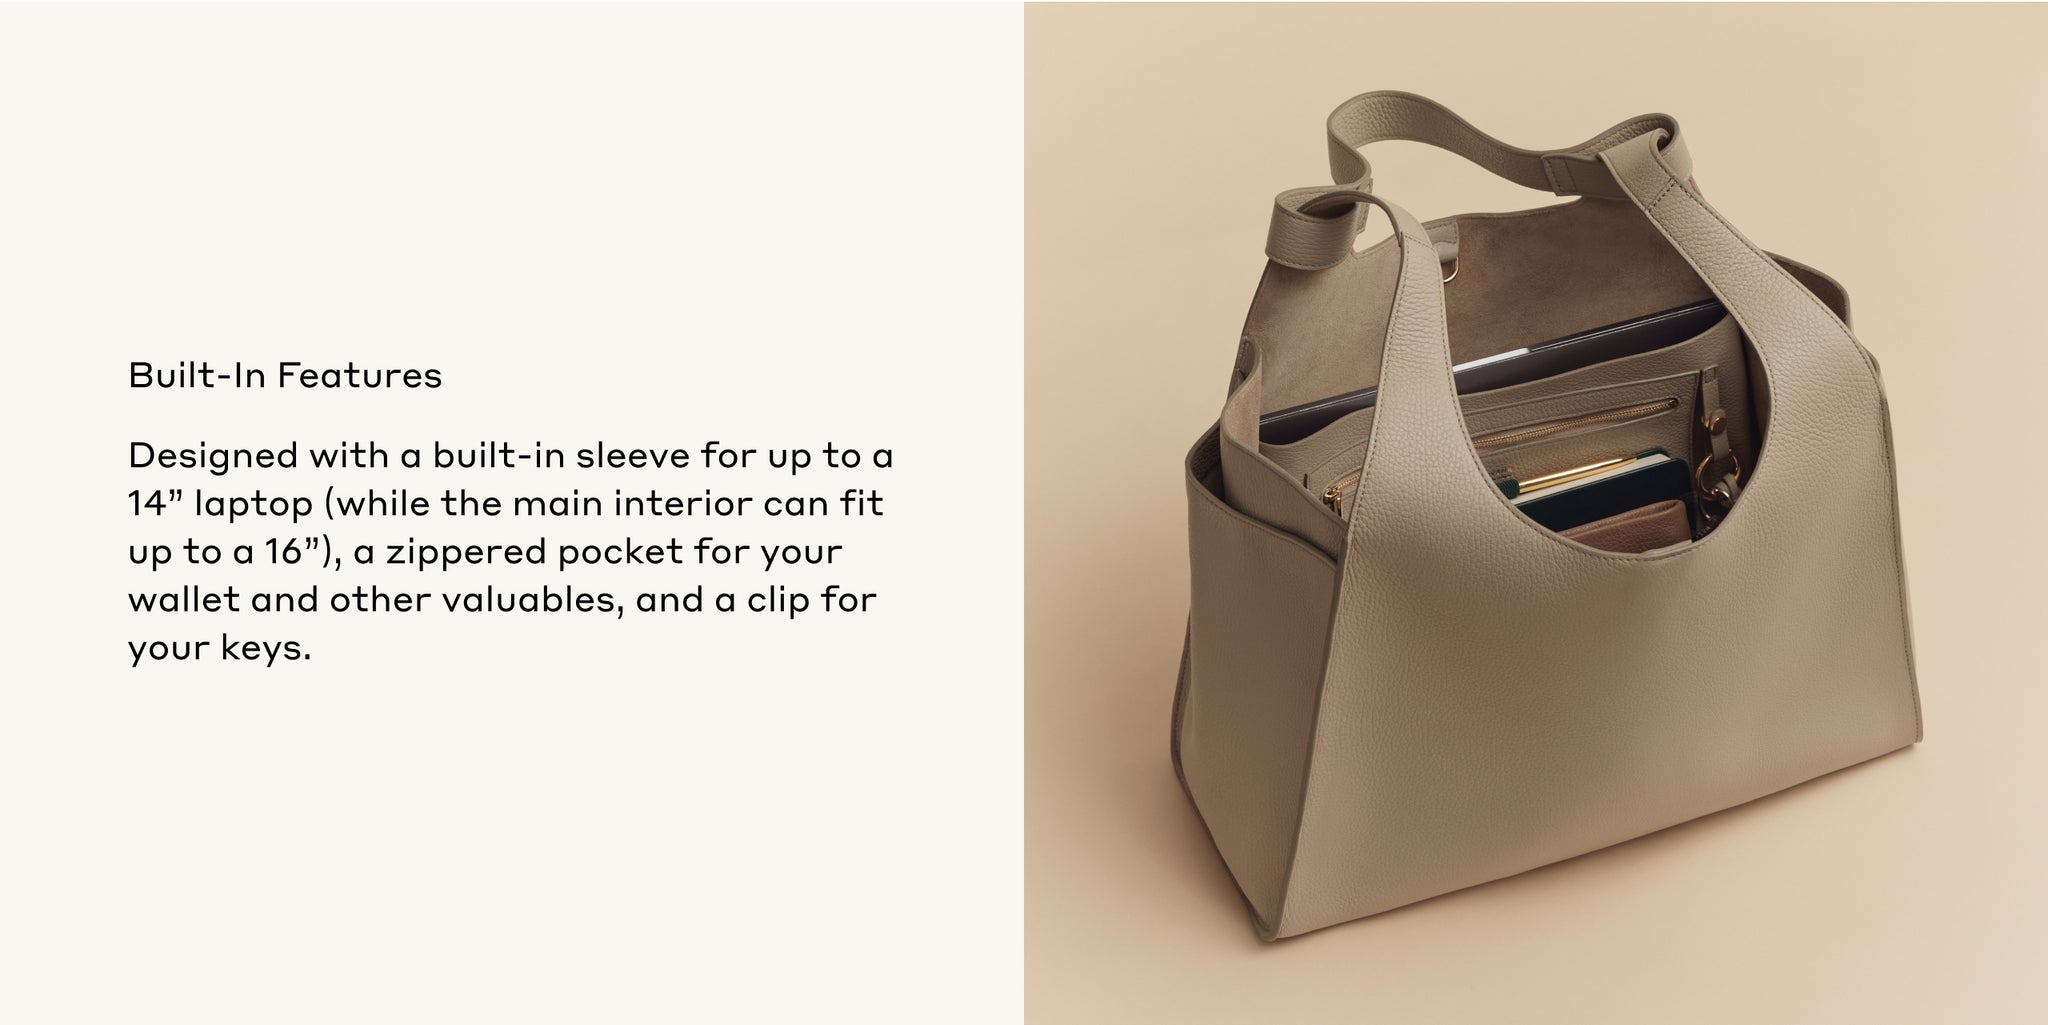 Bag open showing internal compartments with a laptop inside.